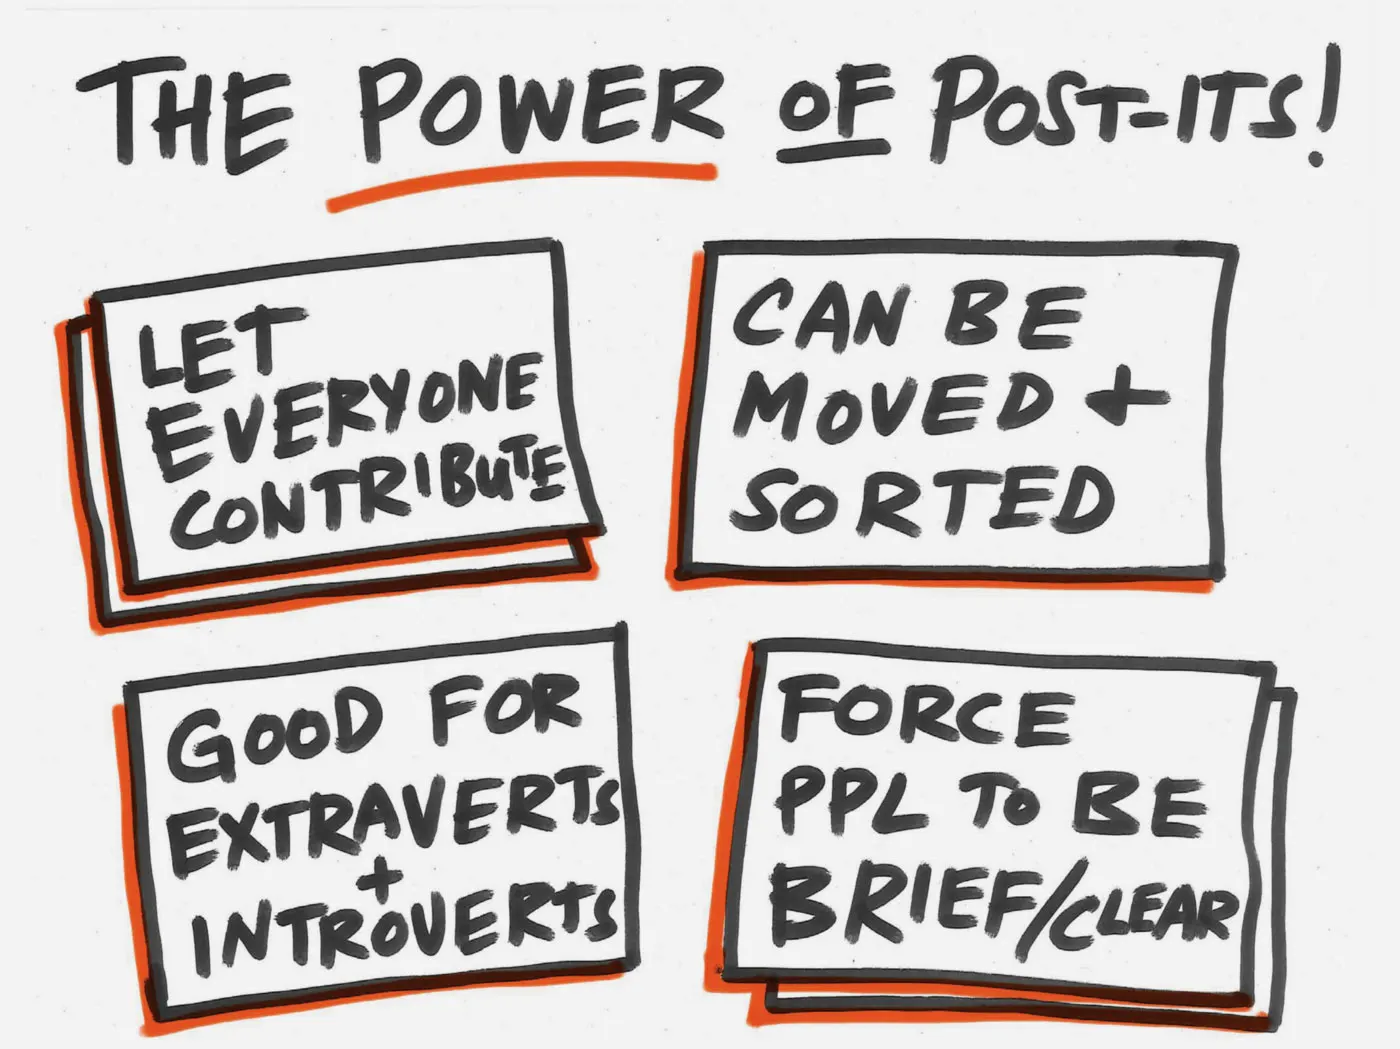 Black marker sketch with the heading "The Power of sticky notes!" along with the reasons they work: Let everyone contribute. Can be moved and sorted. Good for extroverts and introverts. Force people to be brief/clear.